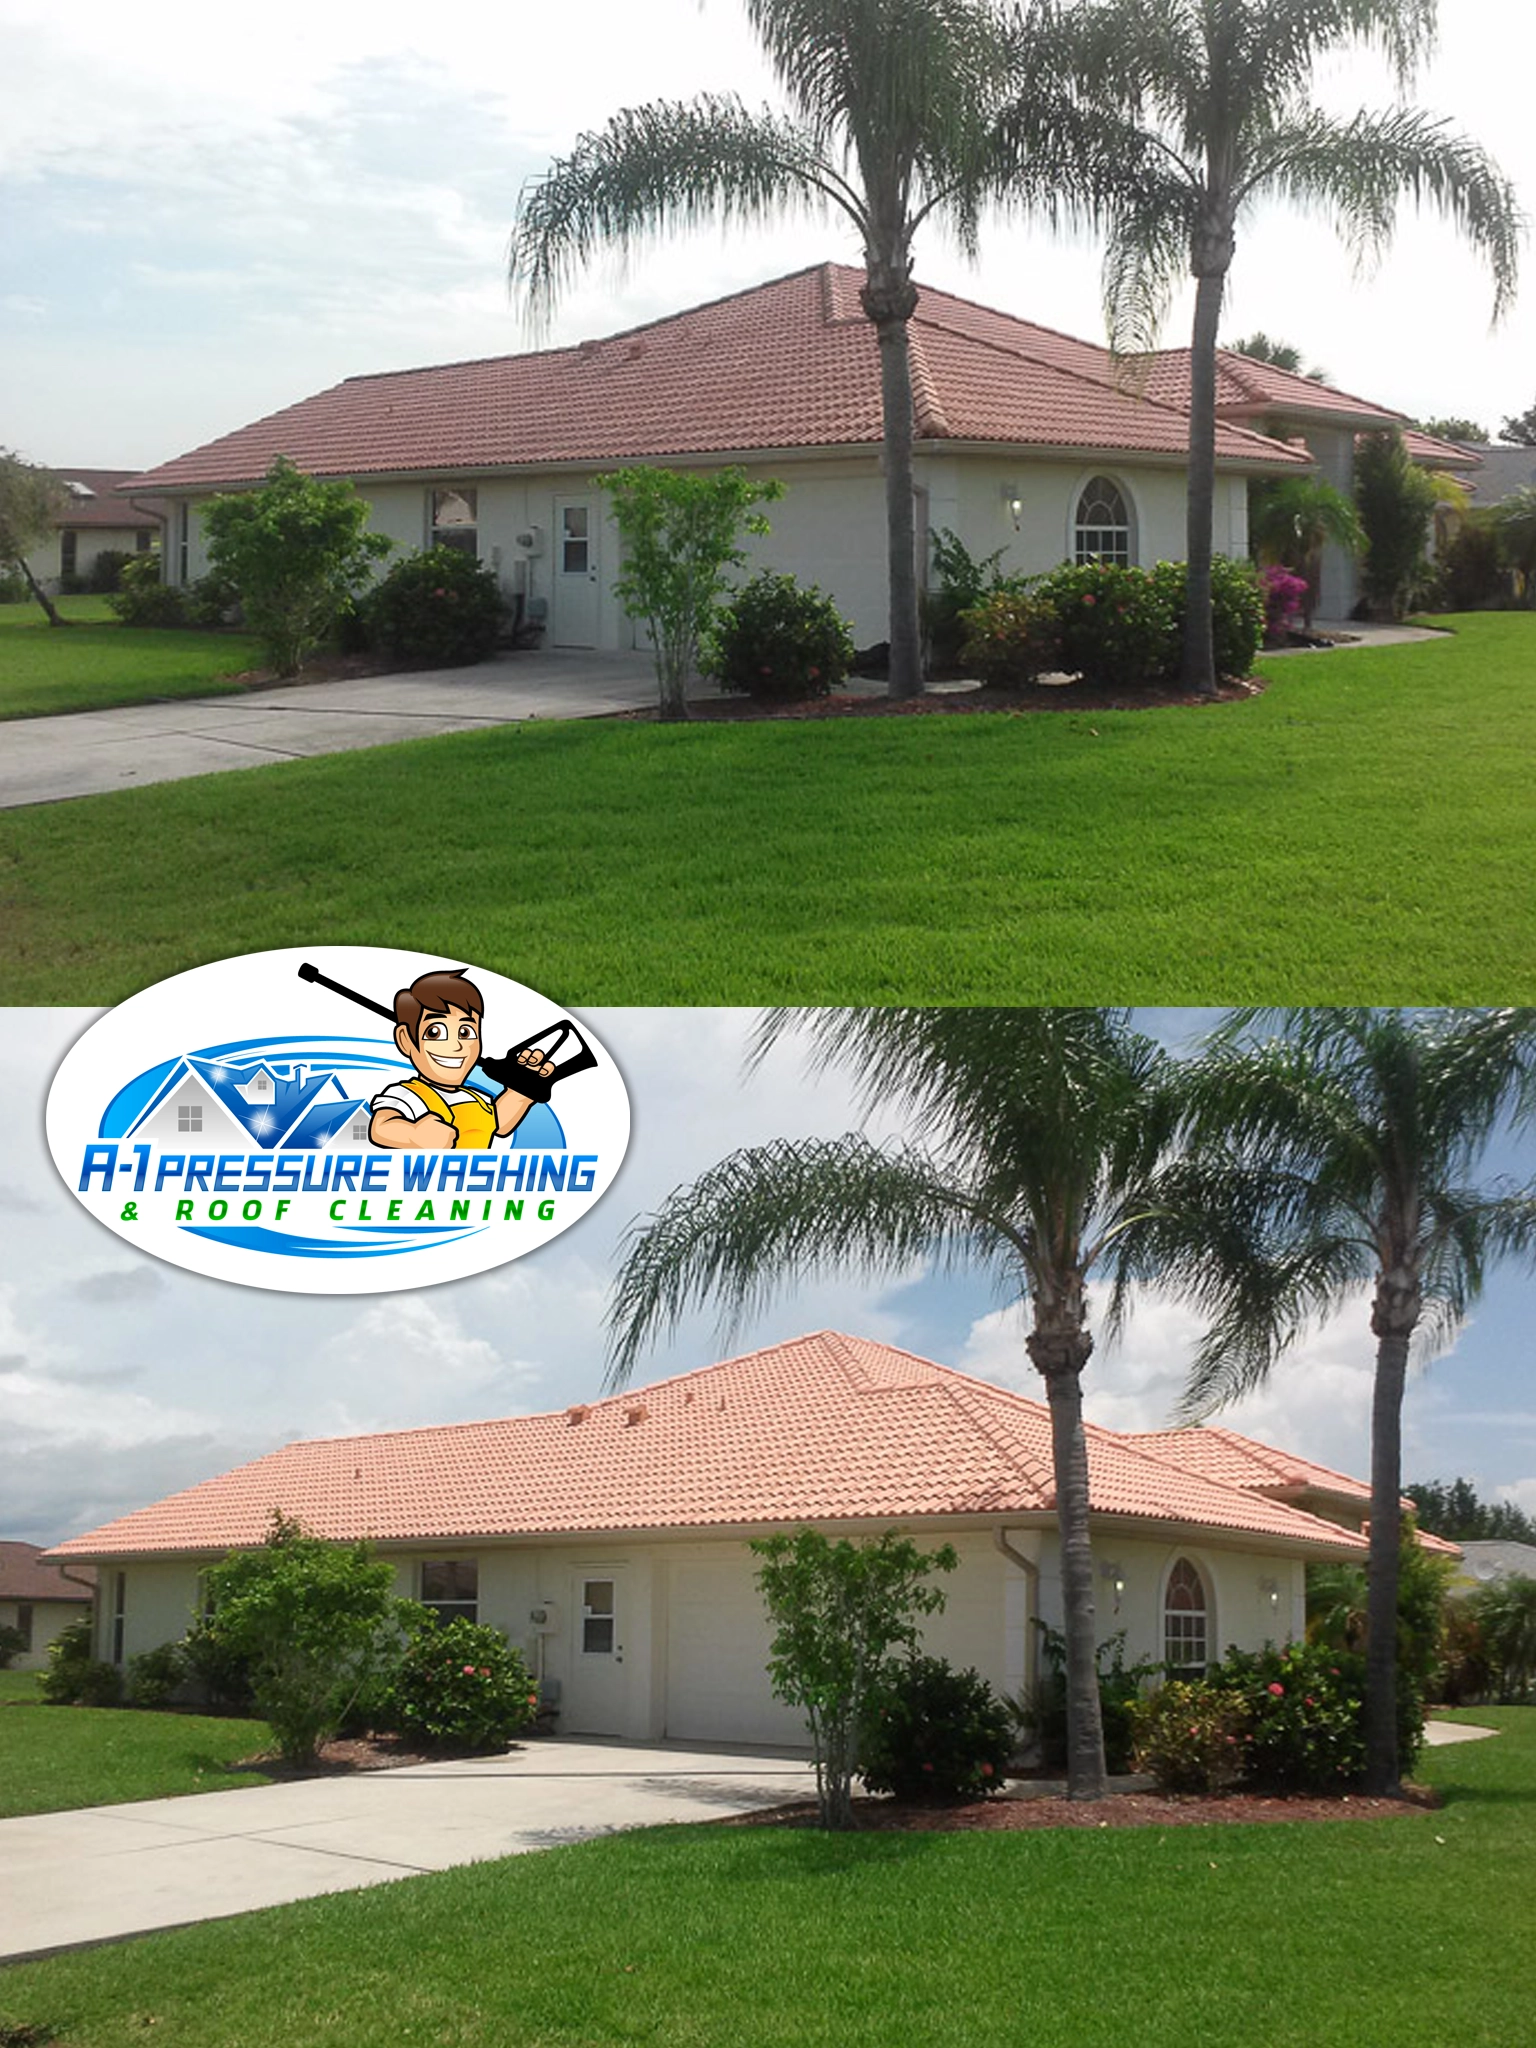 Tile Roof Cleaning | A-1 Pressure Washing & Roof Cleaning | 941-815-8454 